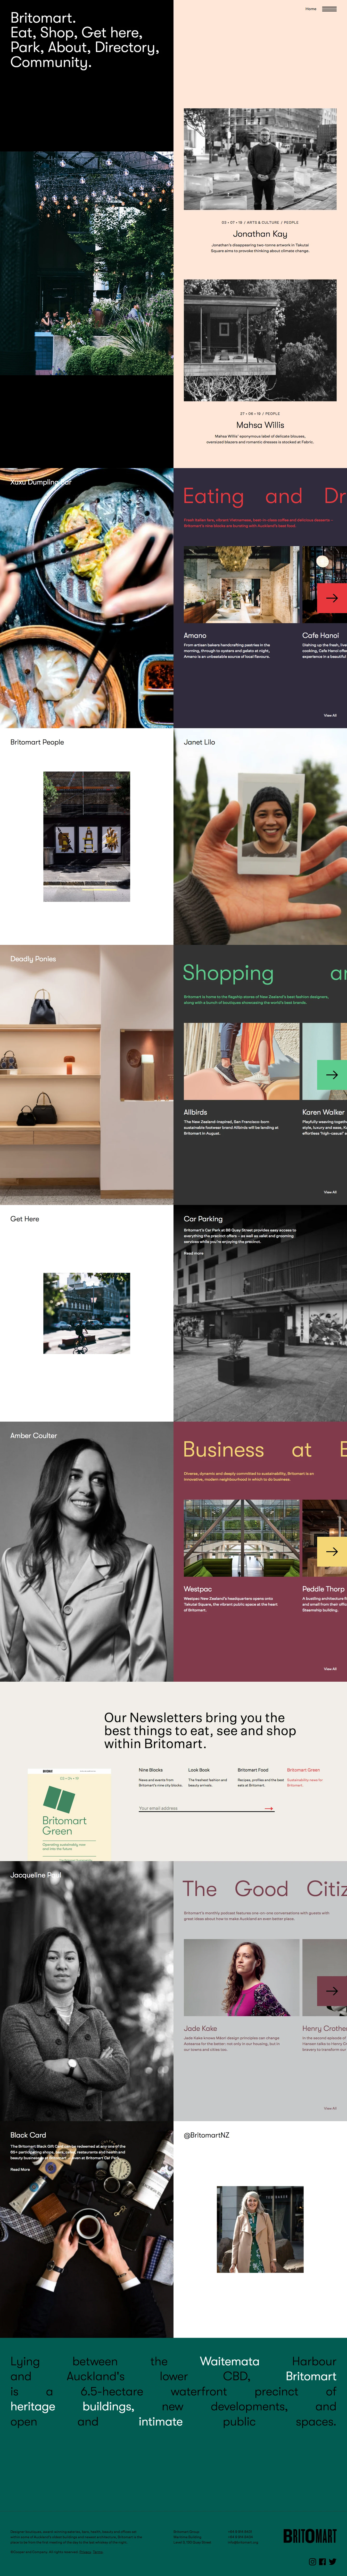 Britomart Landing Page Example: Britomart is a vibrant nine-block precinct at the centre of waterfront Auckland.